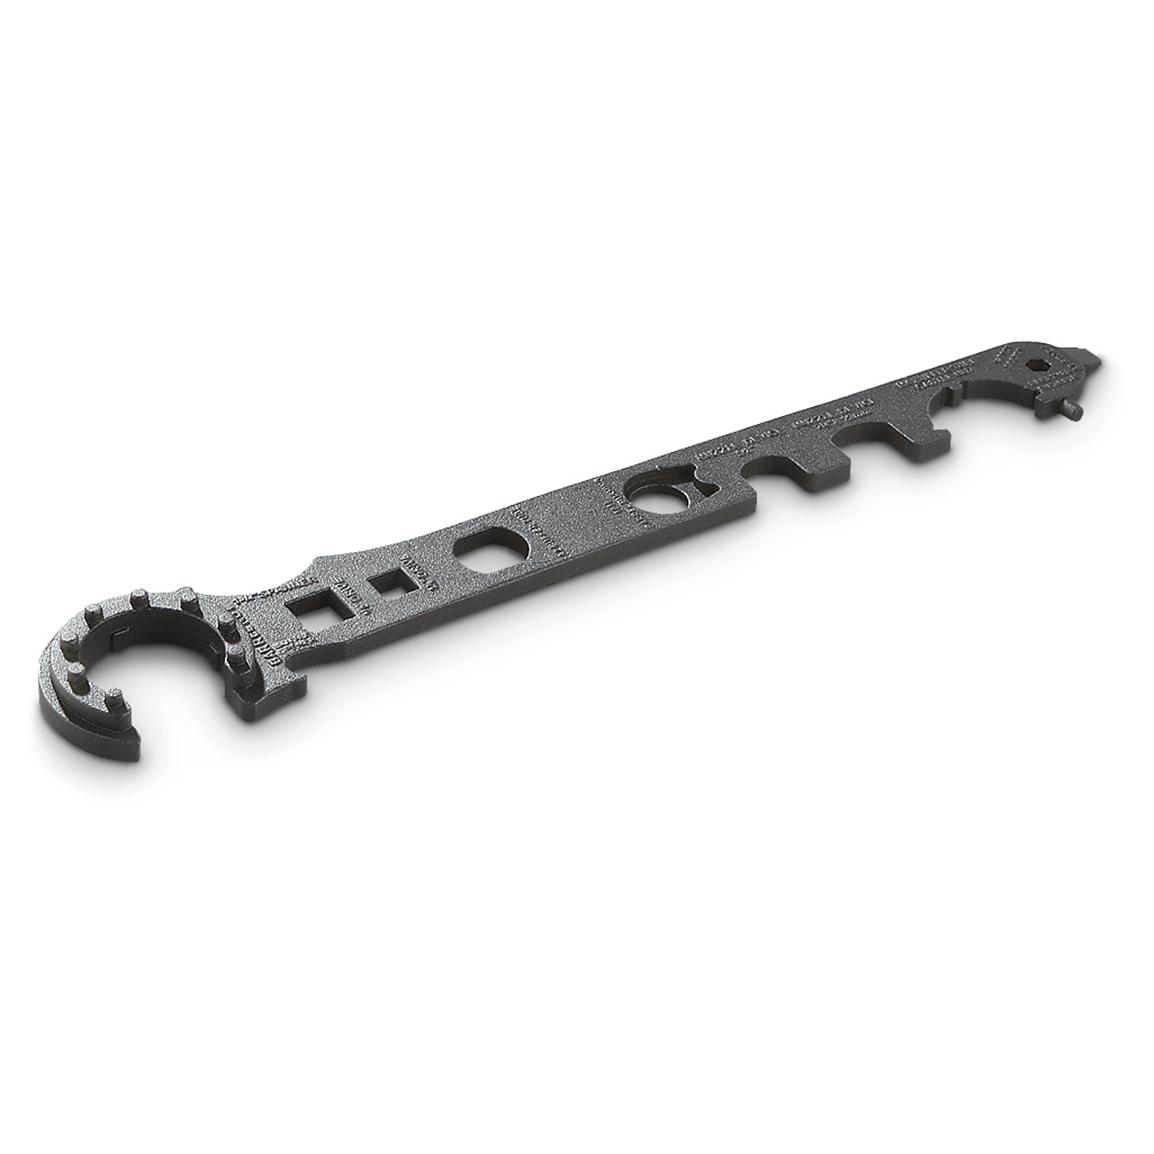 NcSTAR 2nd Generation AR-15 Armorer's Wrench